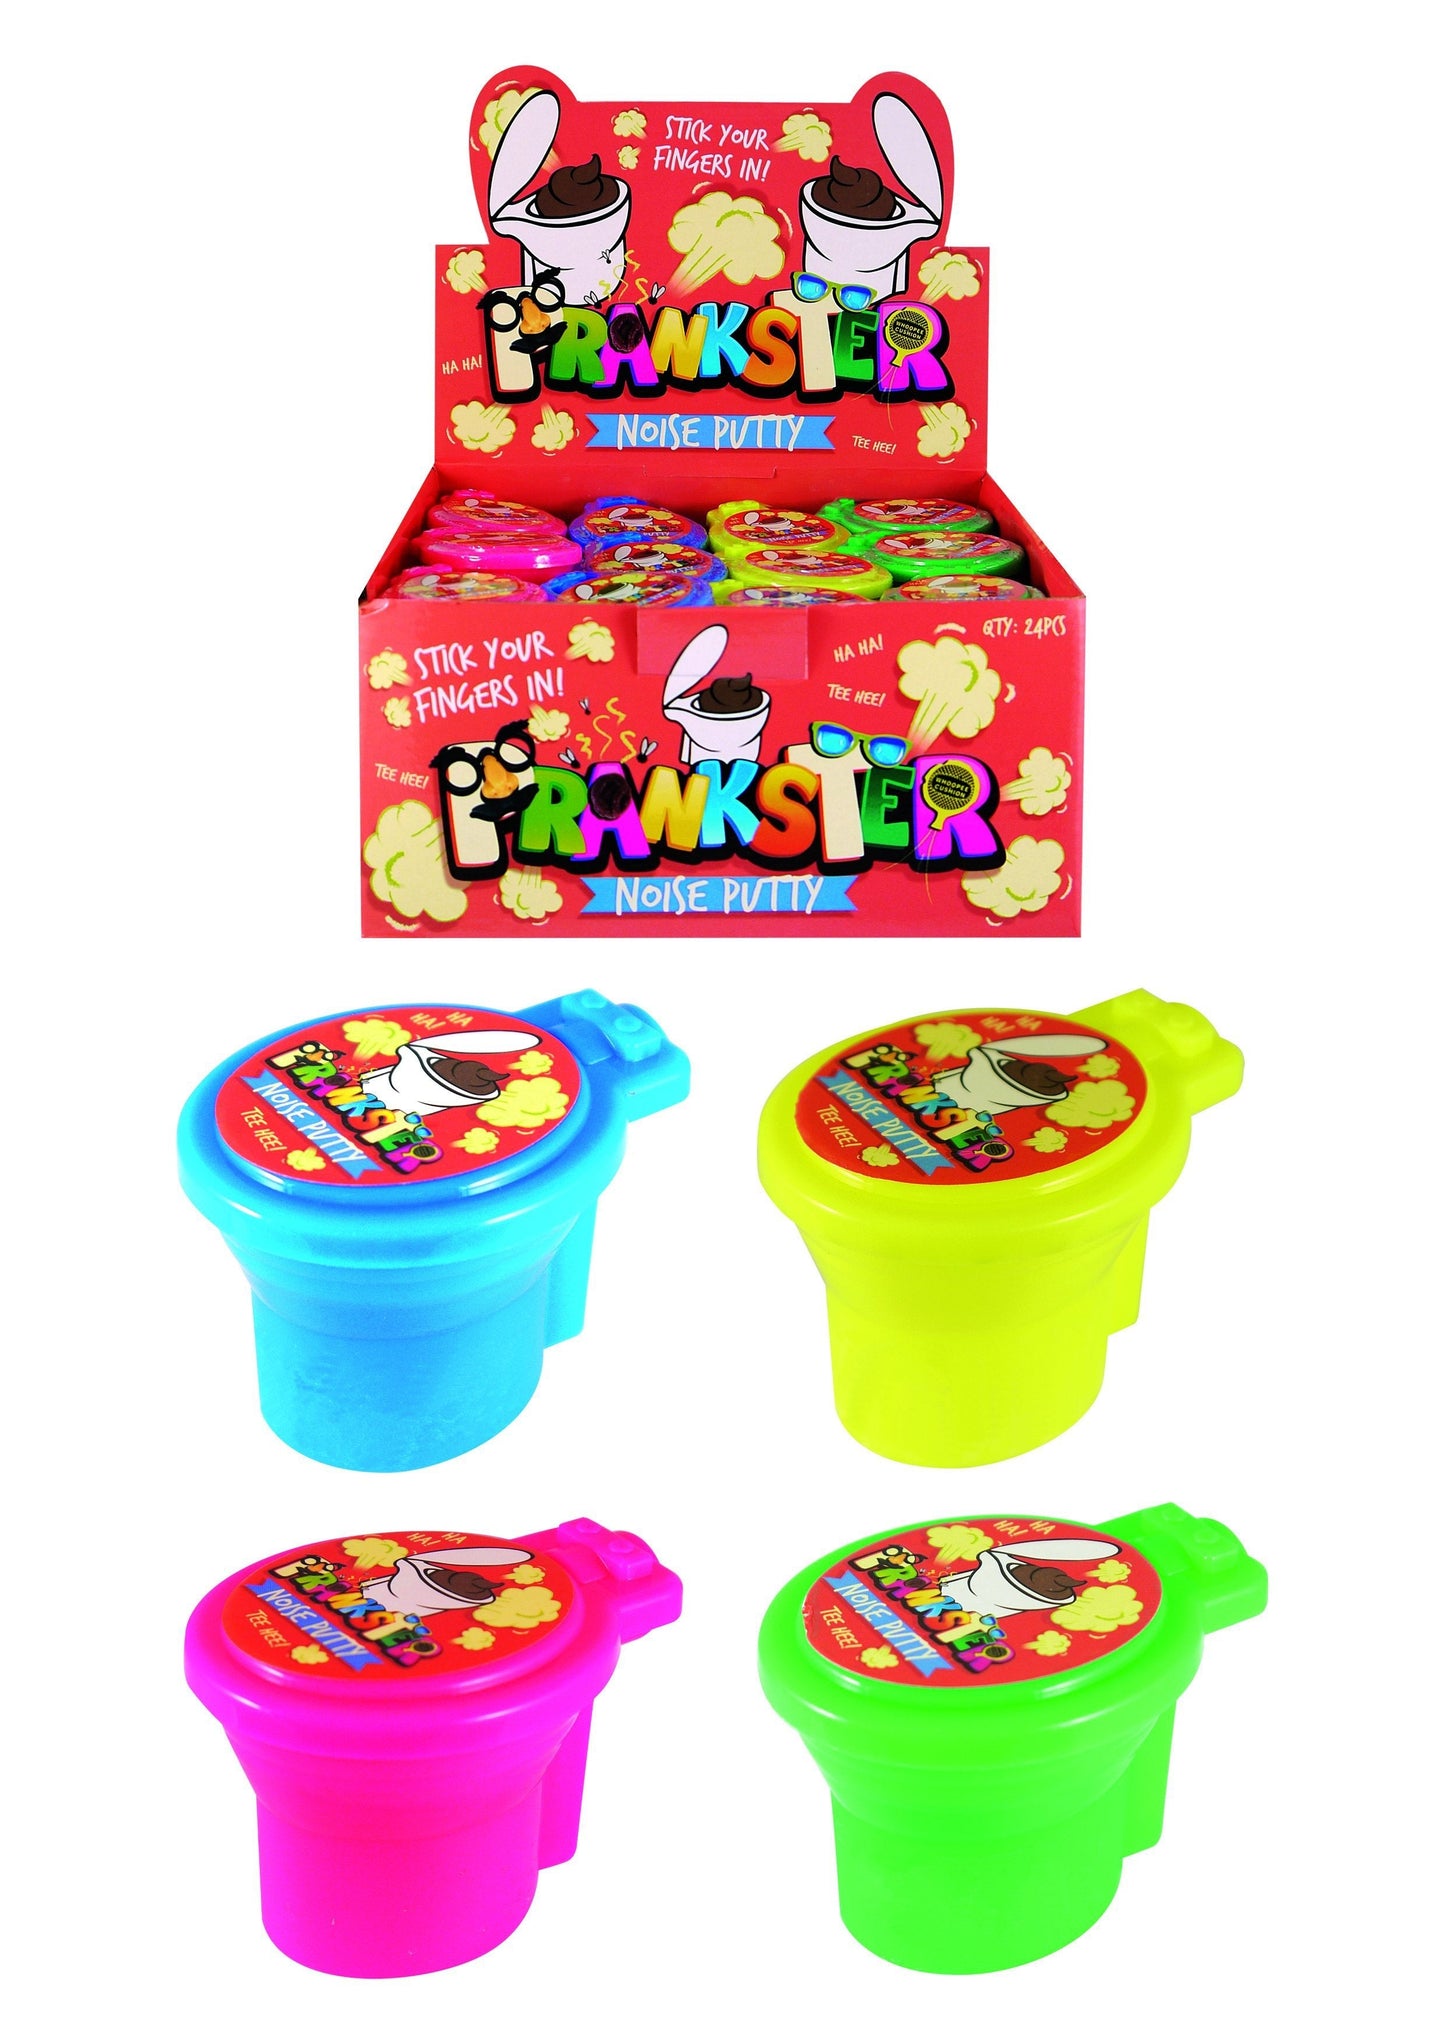 Kids Jokes And Pranks Toilet Noise Putty In 4 Assorted Colours 5 x 5cm N14008 (Parcel Rate)